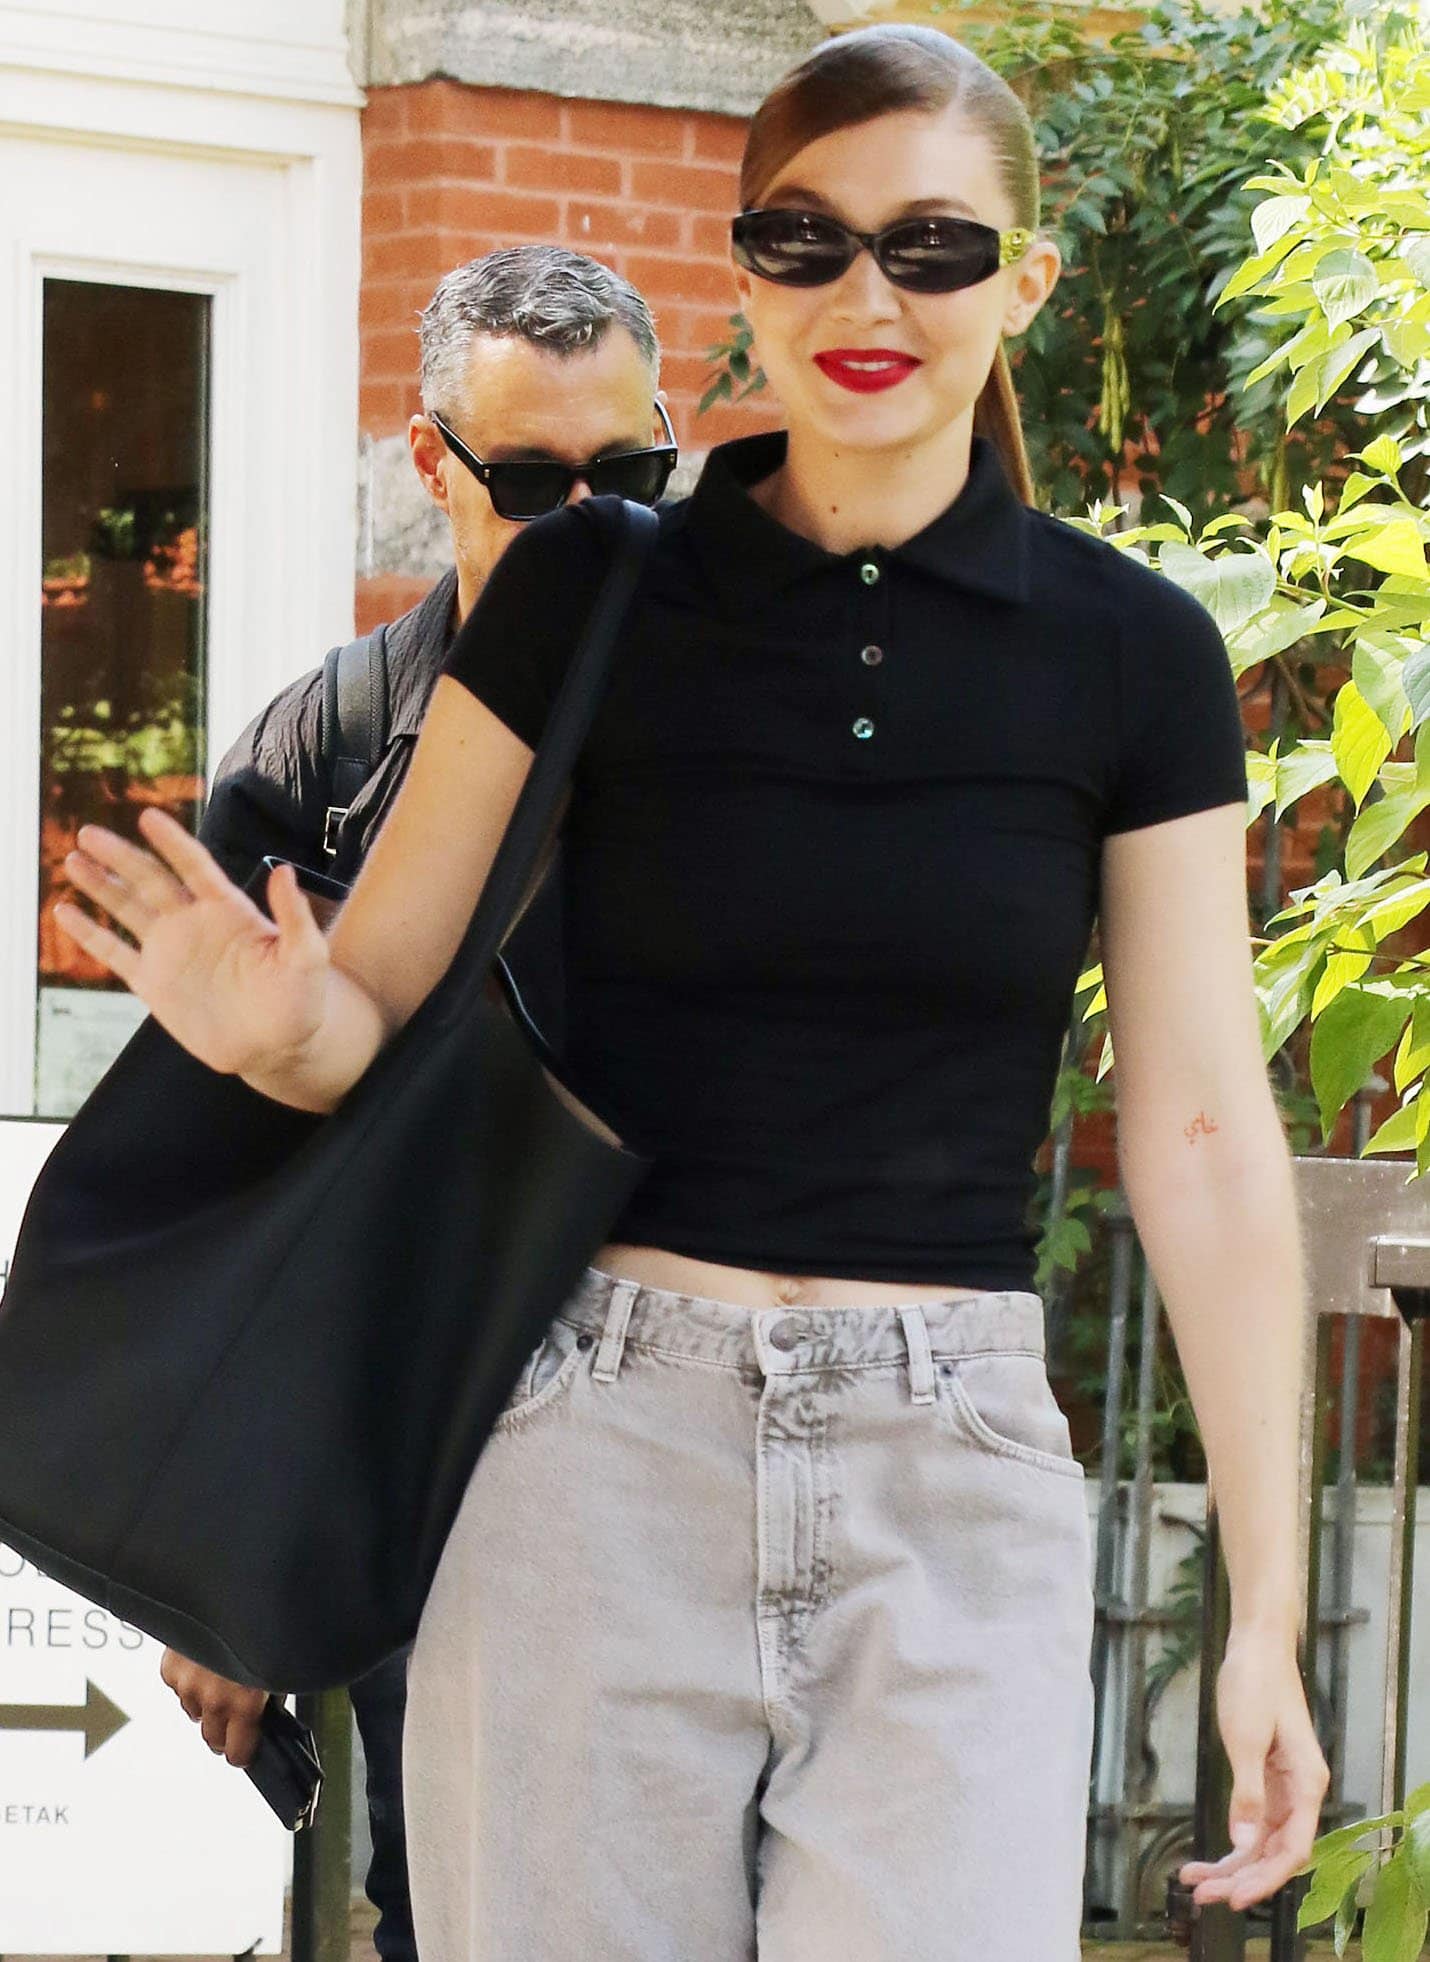 Gigi Hadid styles her hair in a slick side-parted ponytail and wears a swipe of bold red lipstick